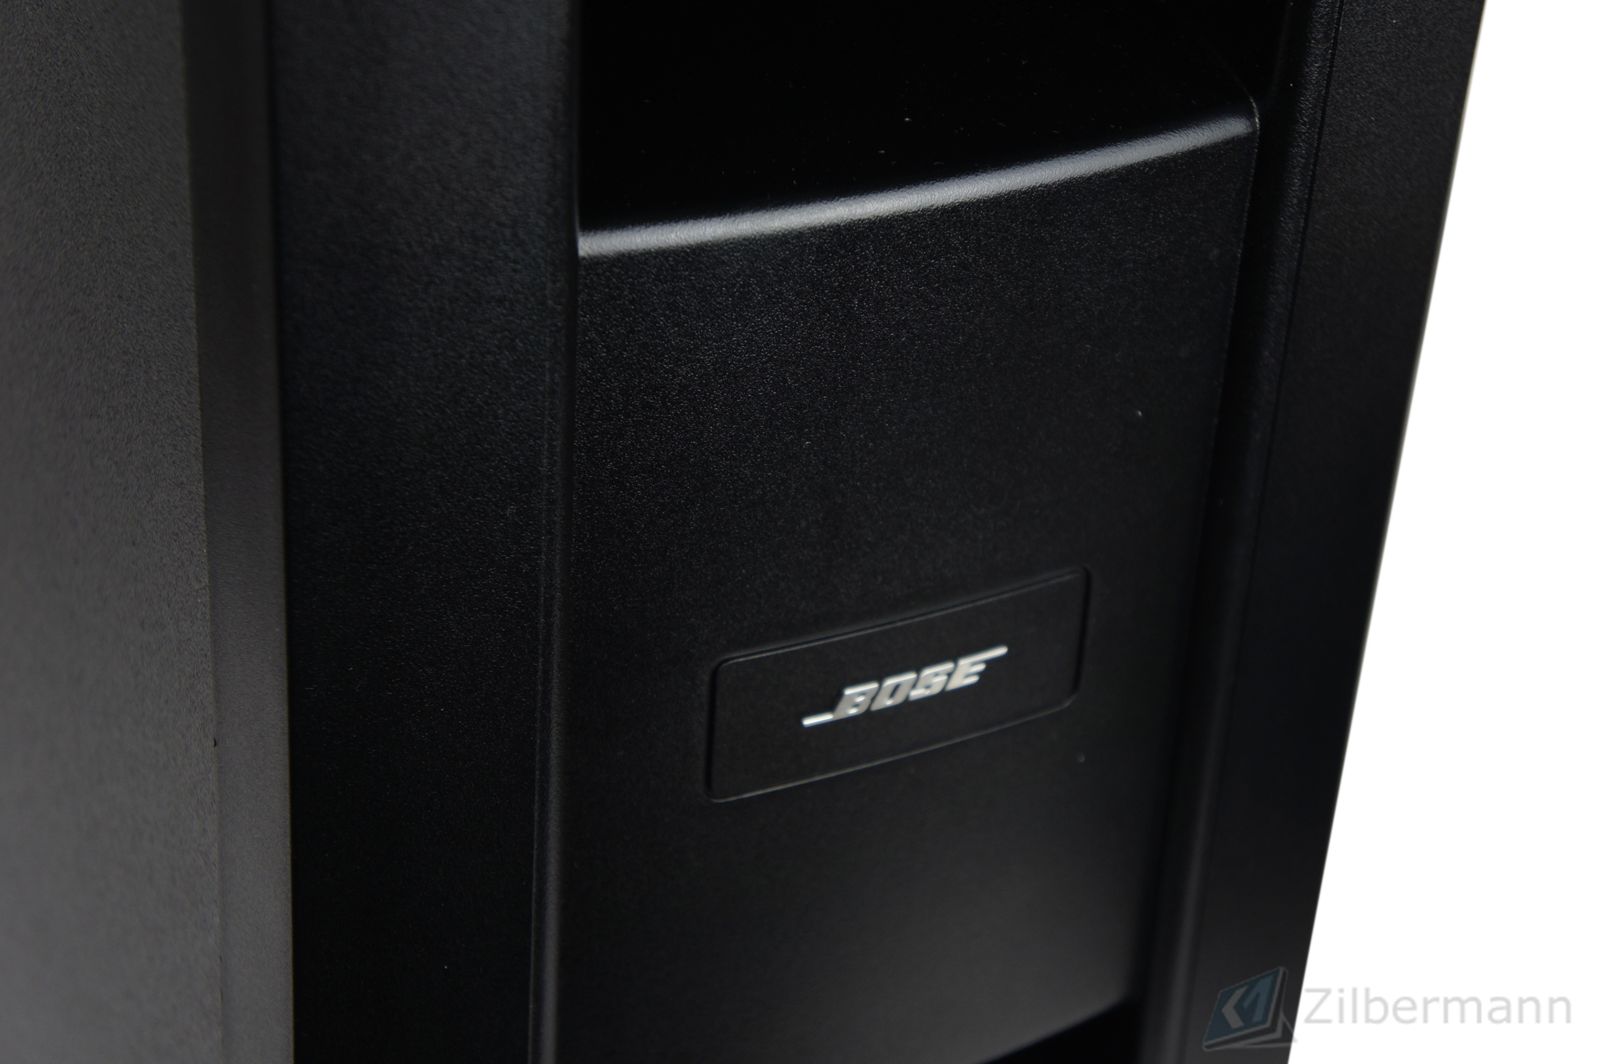 Bose_Lifestyle_T10_5.1_Heimkino-system_Top